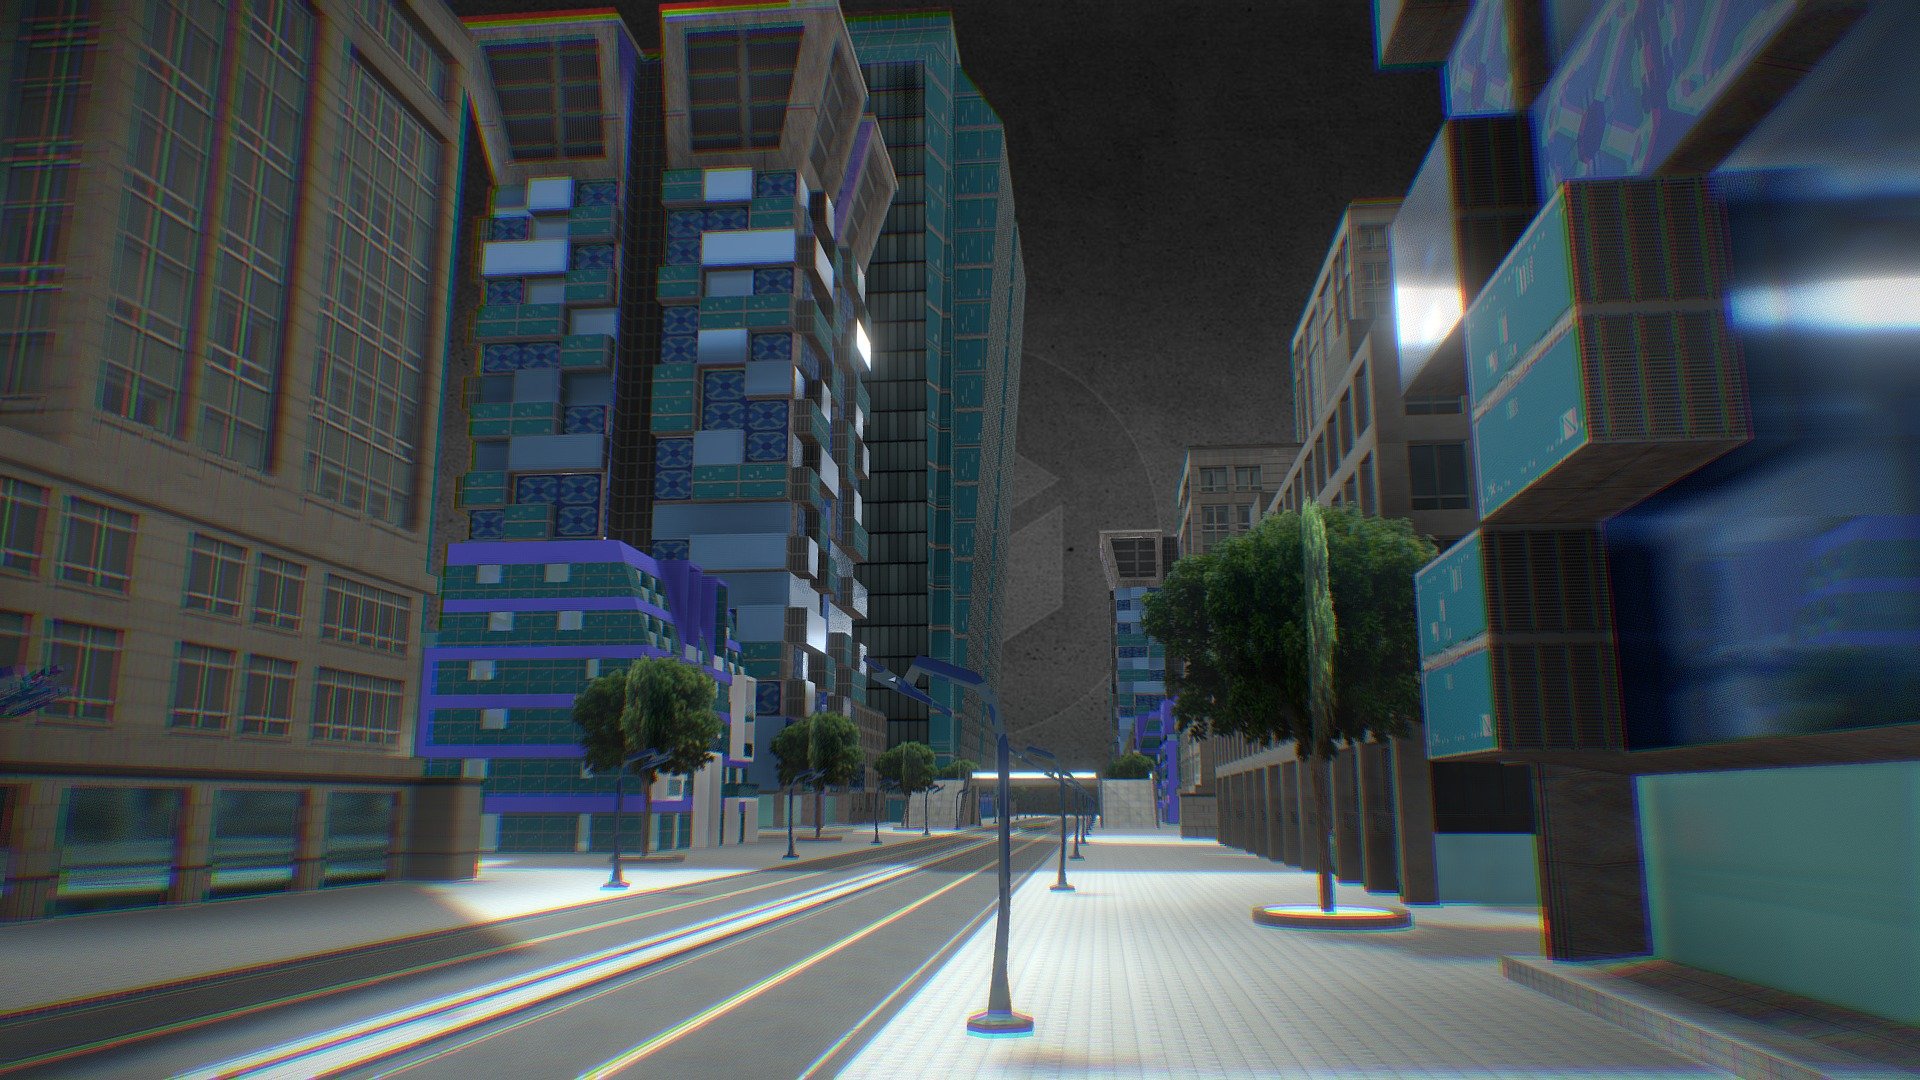 Unreal Engine Optimized City Scene.




Easy placing and PBR Textures for customization

UV Channel for Static Lighting Builds

2 Models included - Seperated into smaller parts and one combined

Full after purchase support via 
HstudioZA@gmail.com - UE City Scene - NEO / SCIFI / Modern - Buy Royalty Free 3D model by OmegaRedZA 3d model